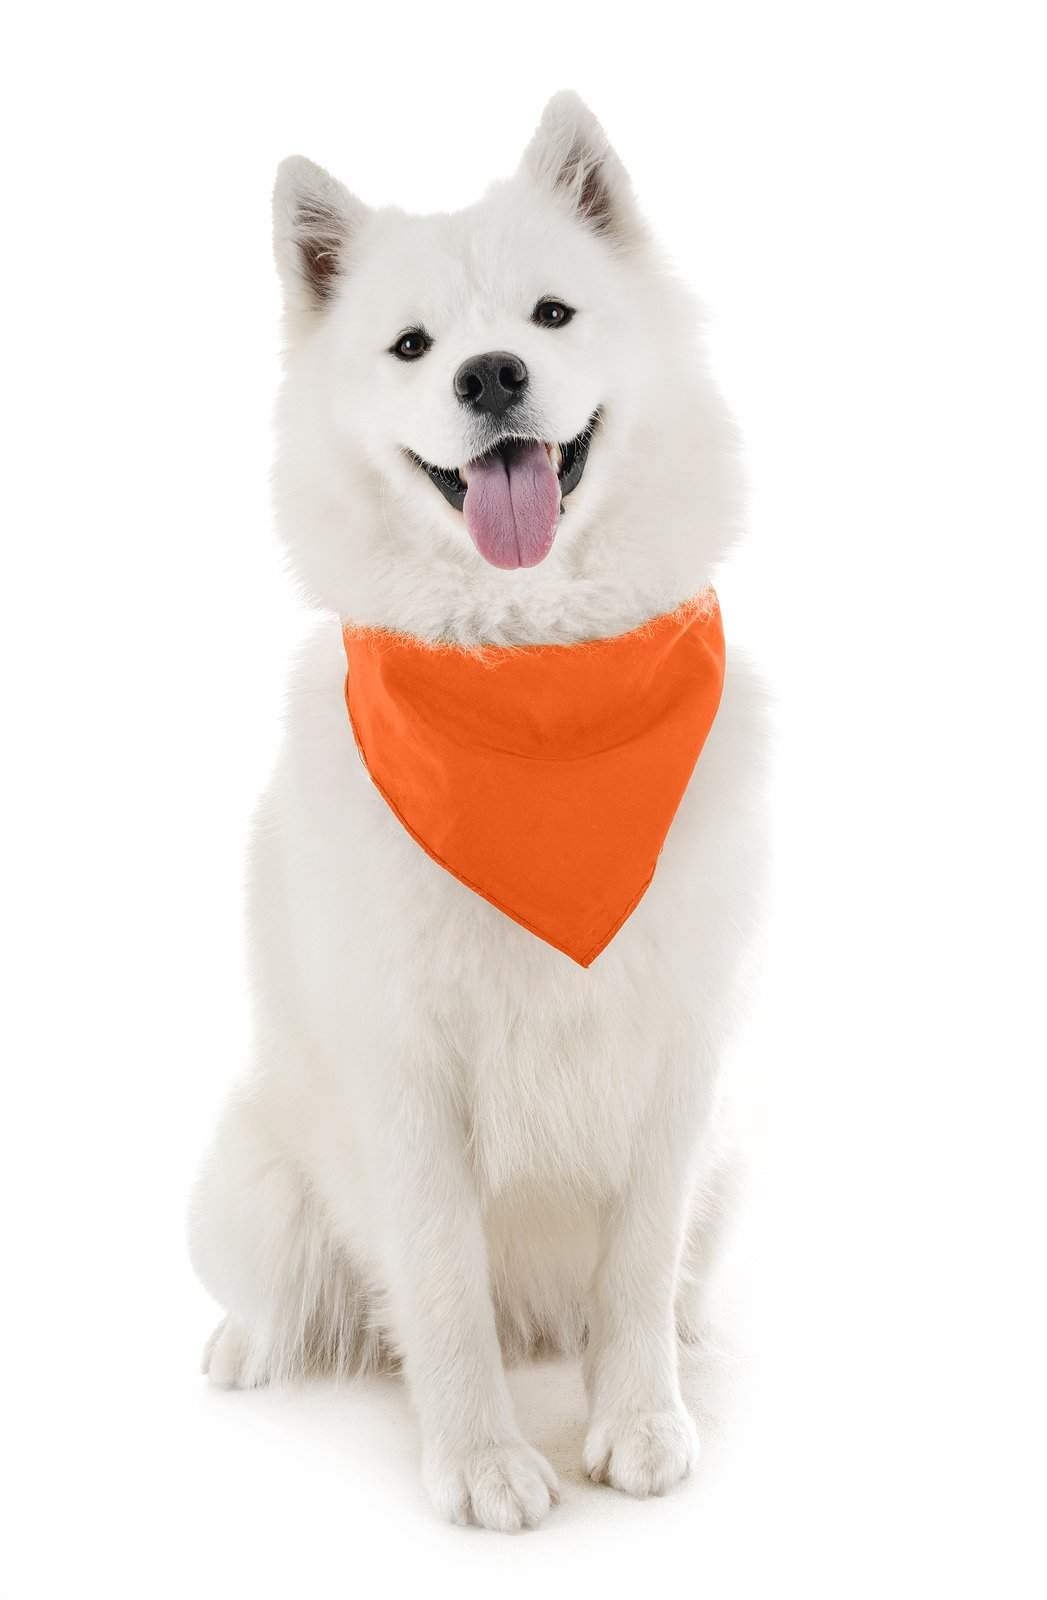 Mechaly Dog Plain Bandanas - 2 Pack - Scarf Triangle Bibs for Small, Medium and Large Puppies, Dogs and Cats